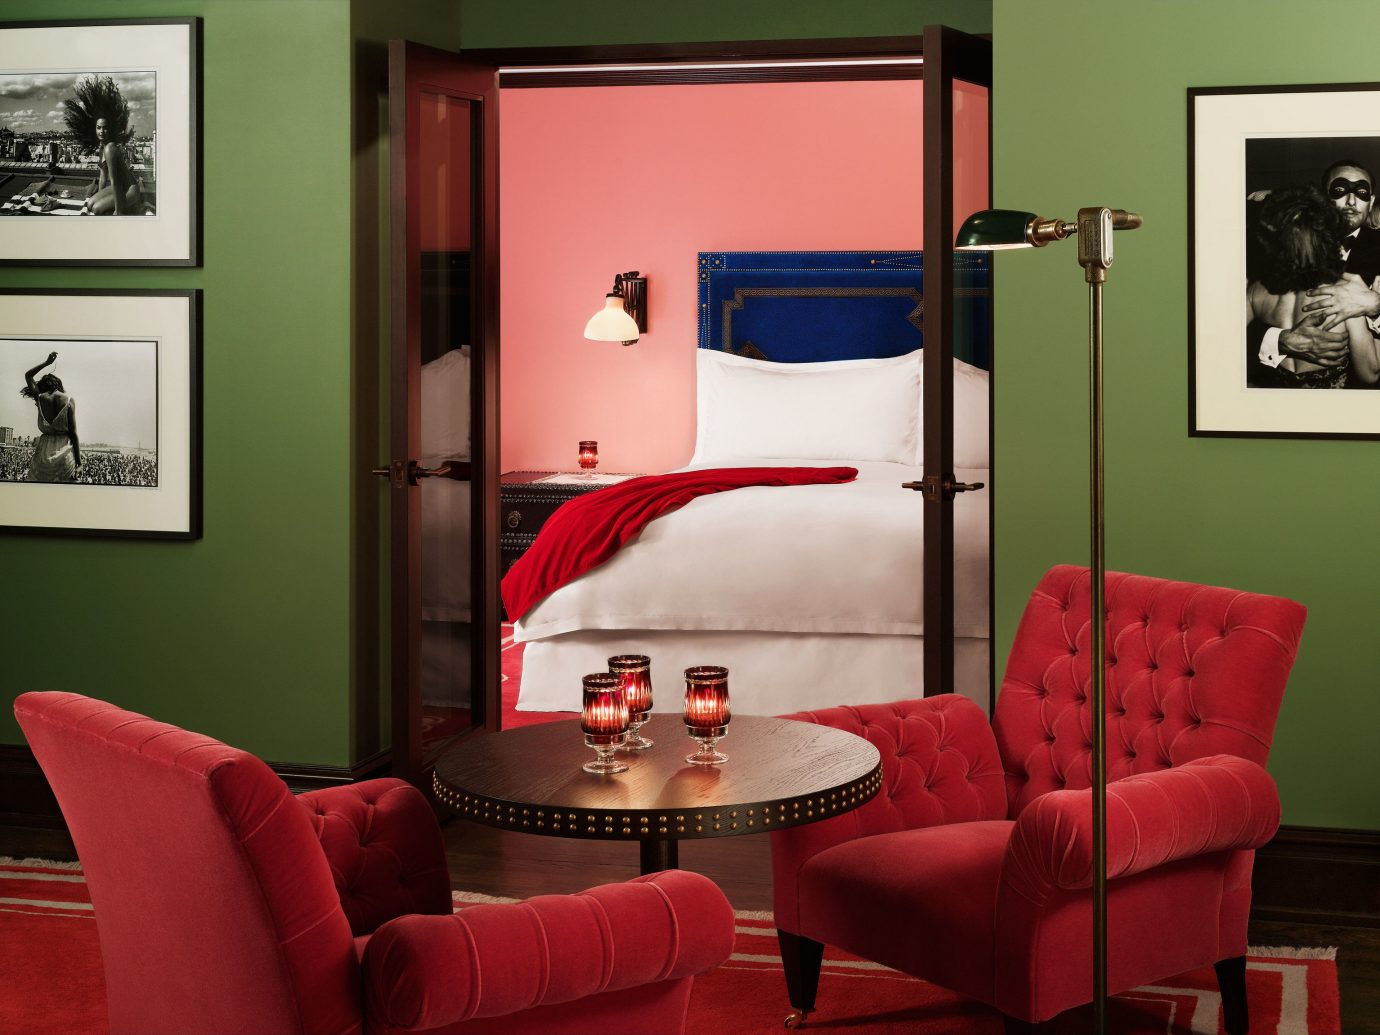 Gramercy Park Hotel, Hotels Luxury Travel NYC Romance Romantic Hotels indoor wall sofa Living room red color floor living room furniture interior design home Suite Design leather decorated